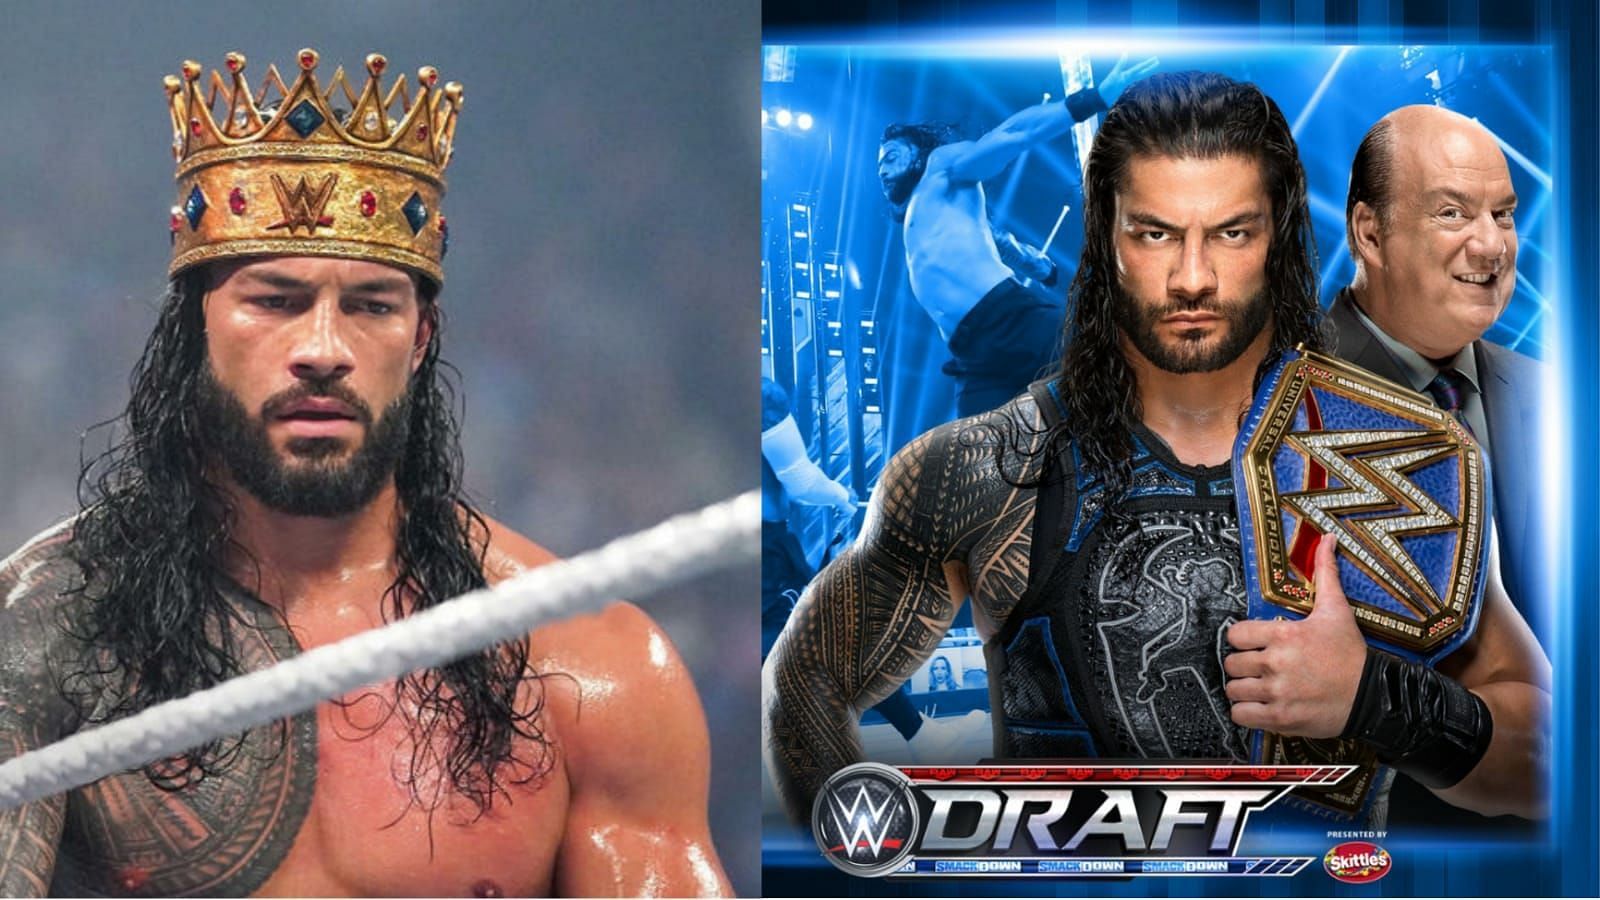 Roman Reigns was the number one draft pick on SmackDown!